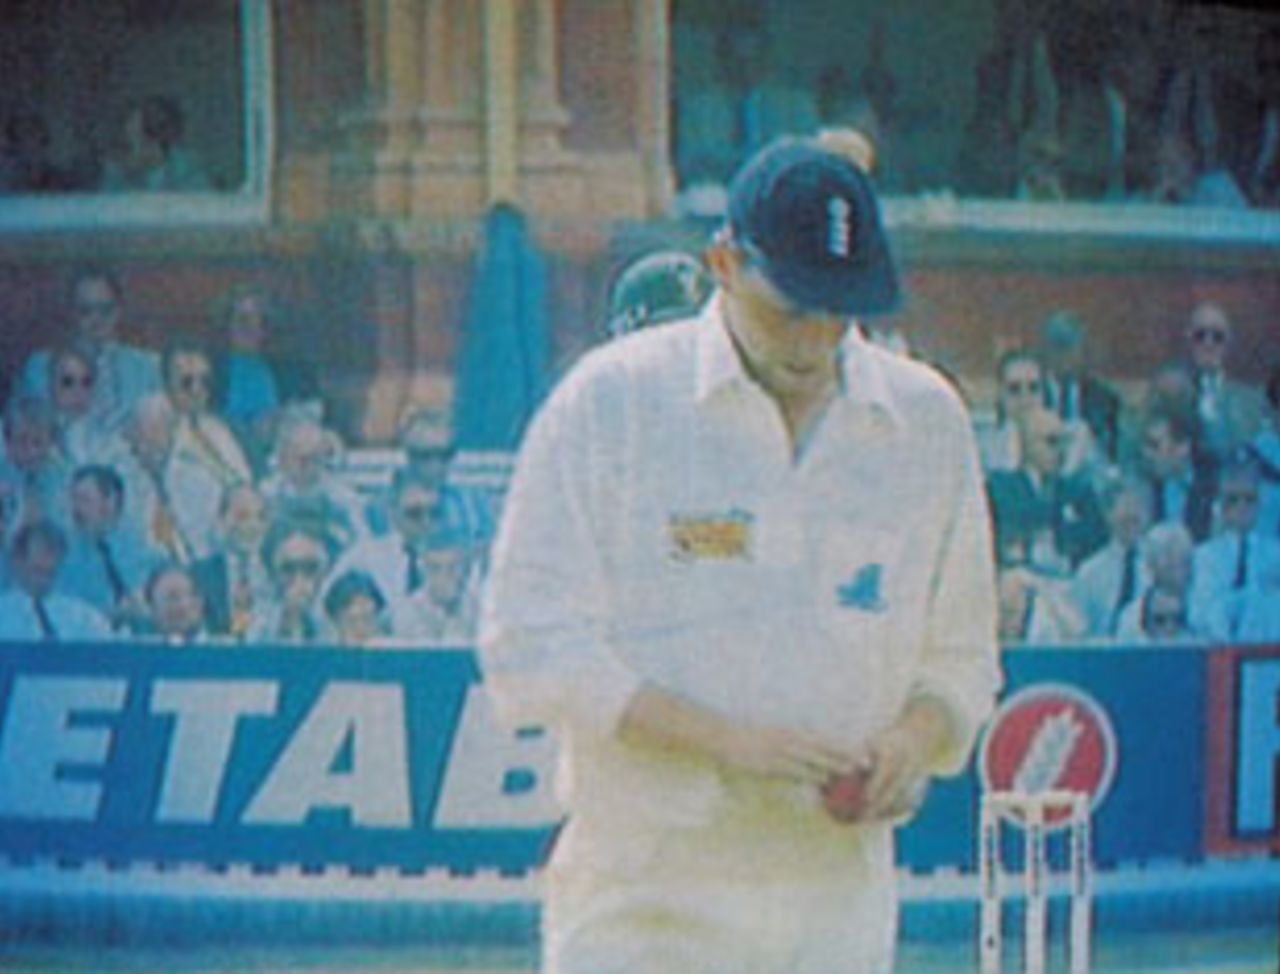 Michael Atherton caught on camera during the dirt-in-the-pocket affair, England v South Africa, Lord's, 1994